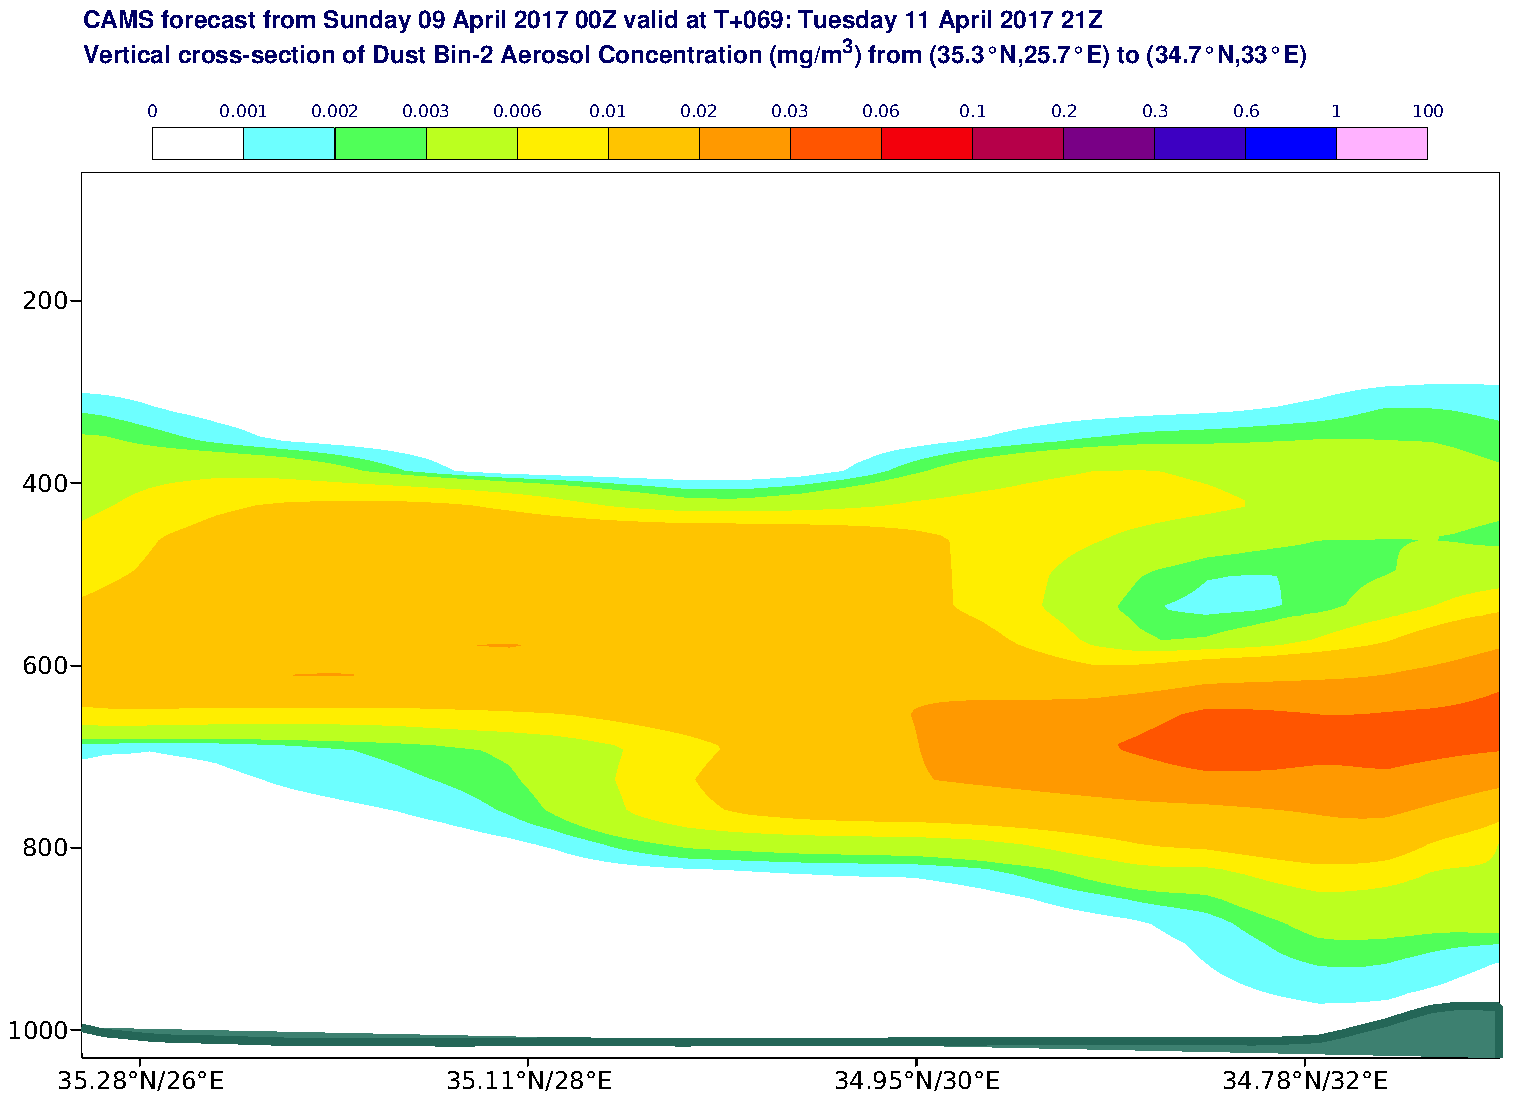 Vertical cross-section of Dust Bin-2 Aerosol Concentration (mg/m3) valid at T69 - 2017-04-11 21:00